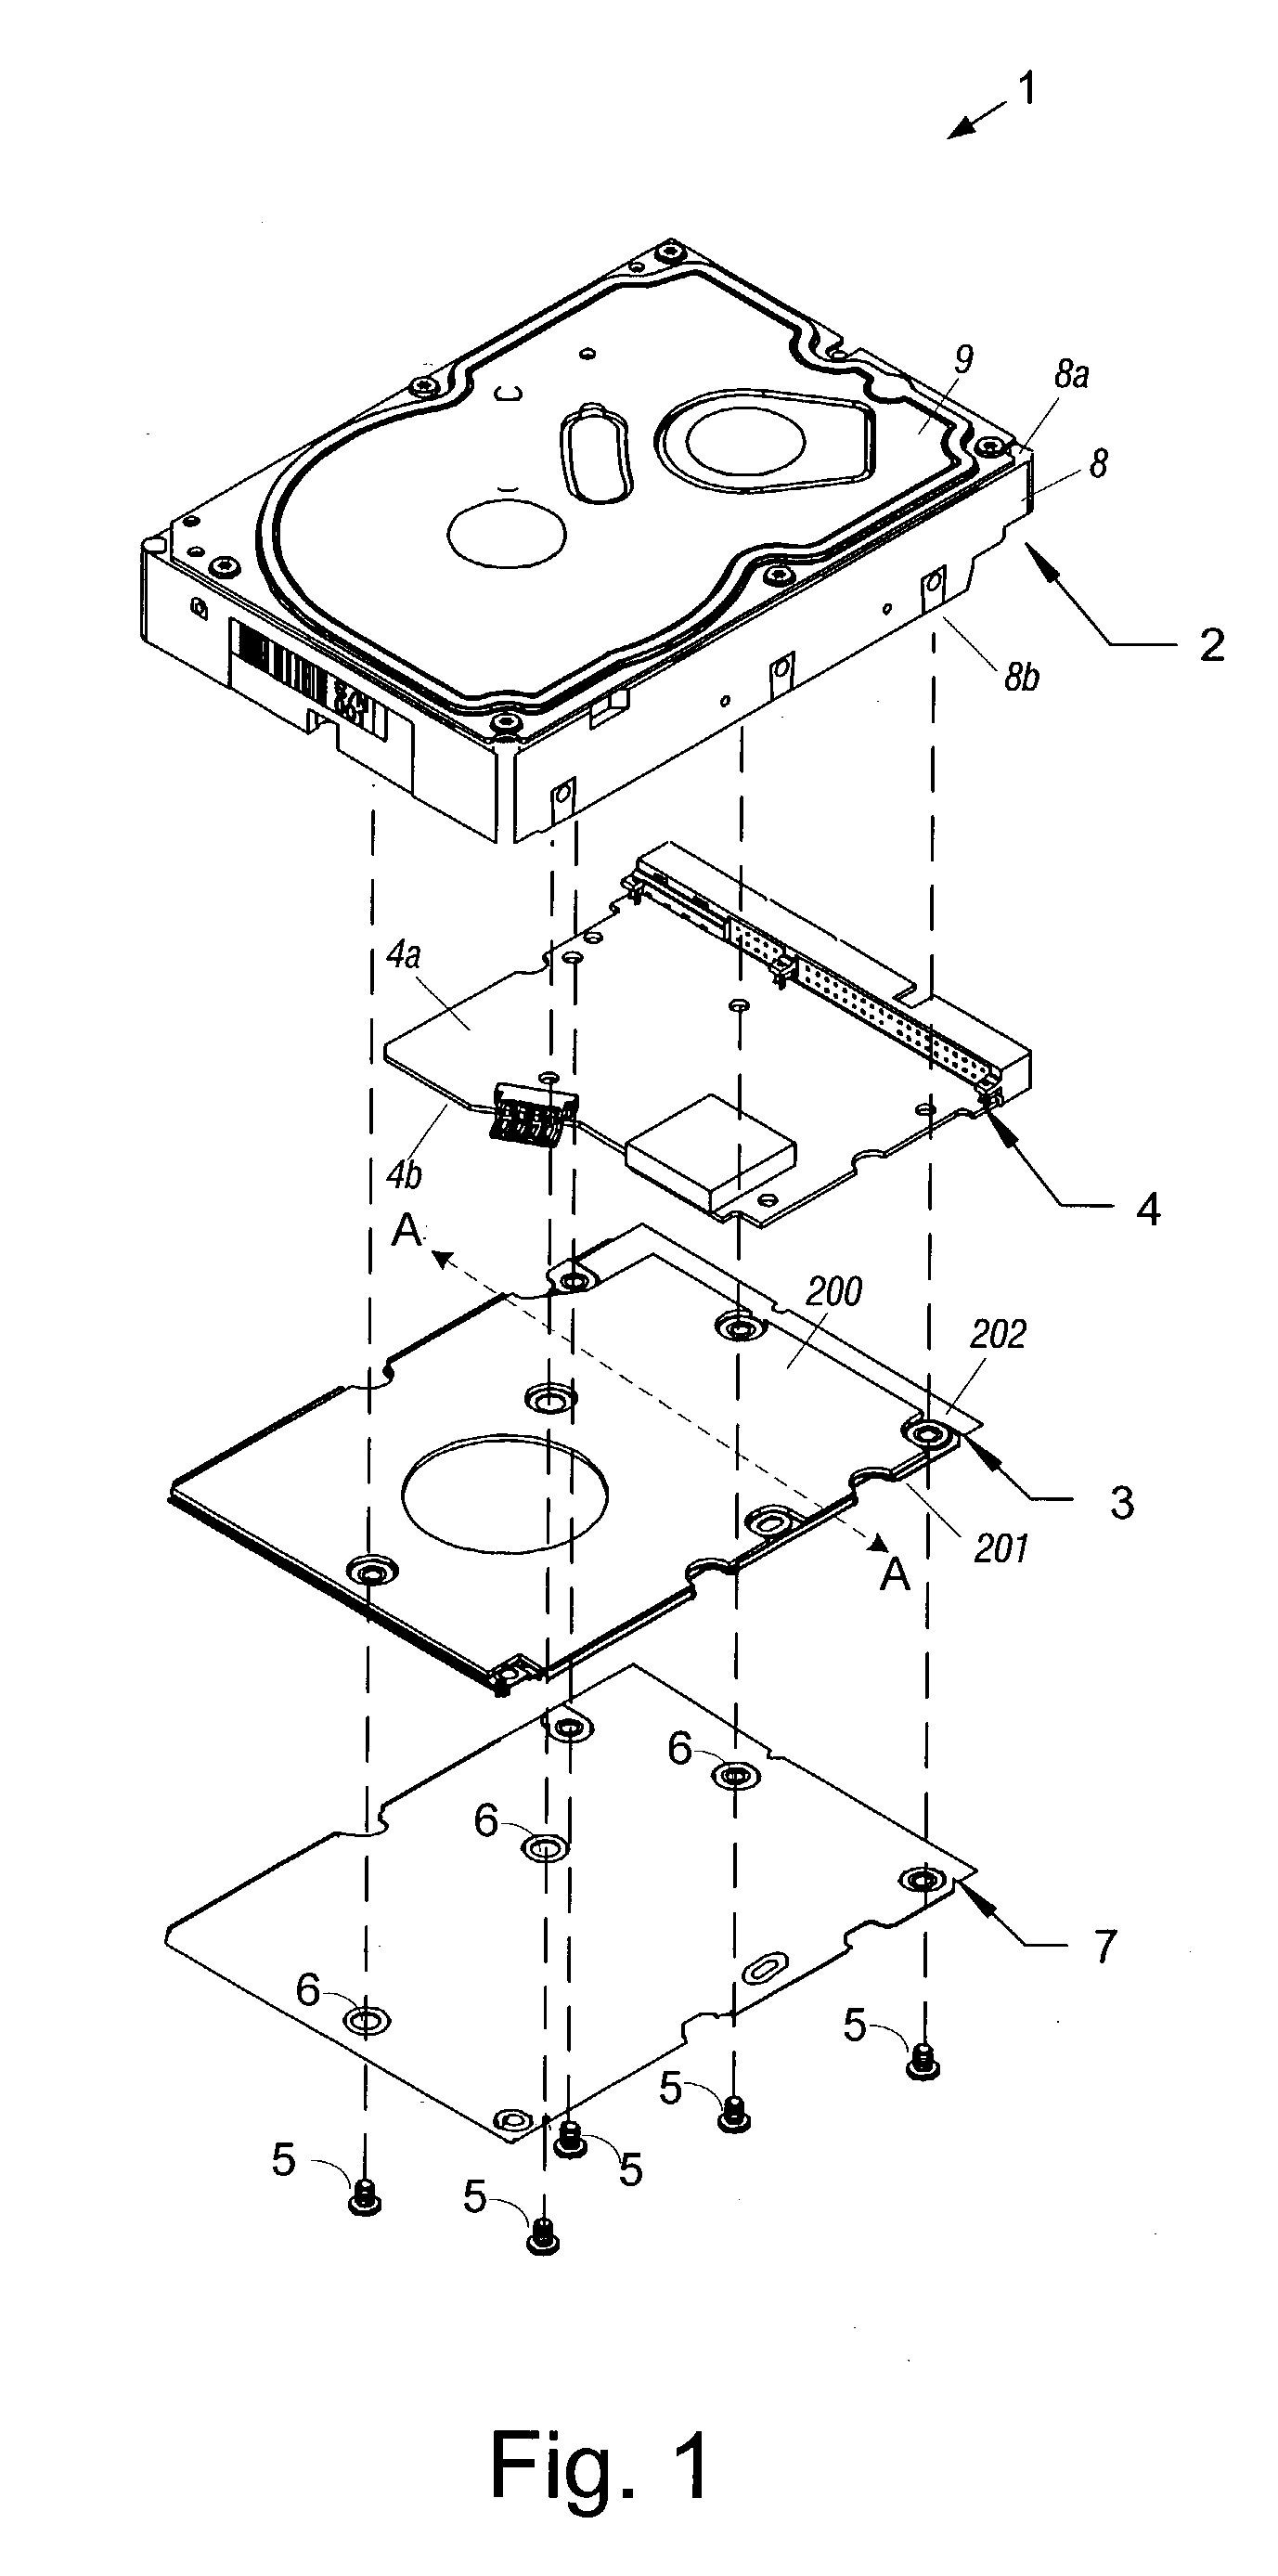 Disk drive having an acoustic damping shield assembly with an acoustic barrier layer